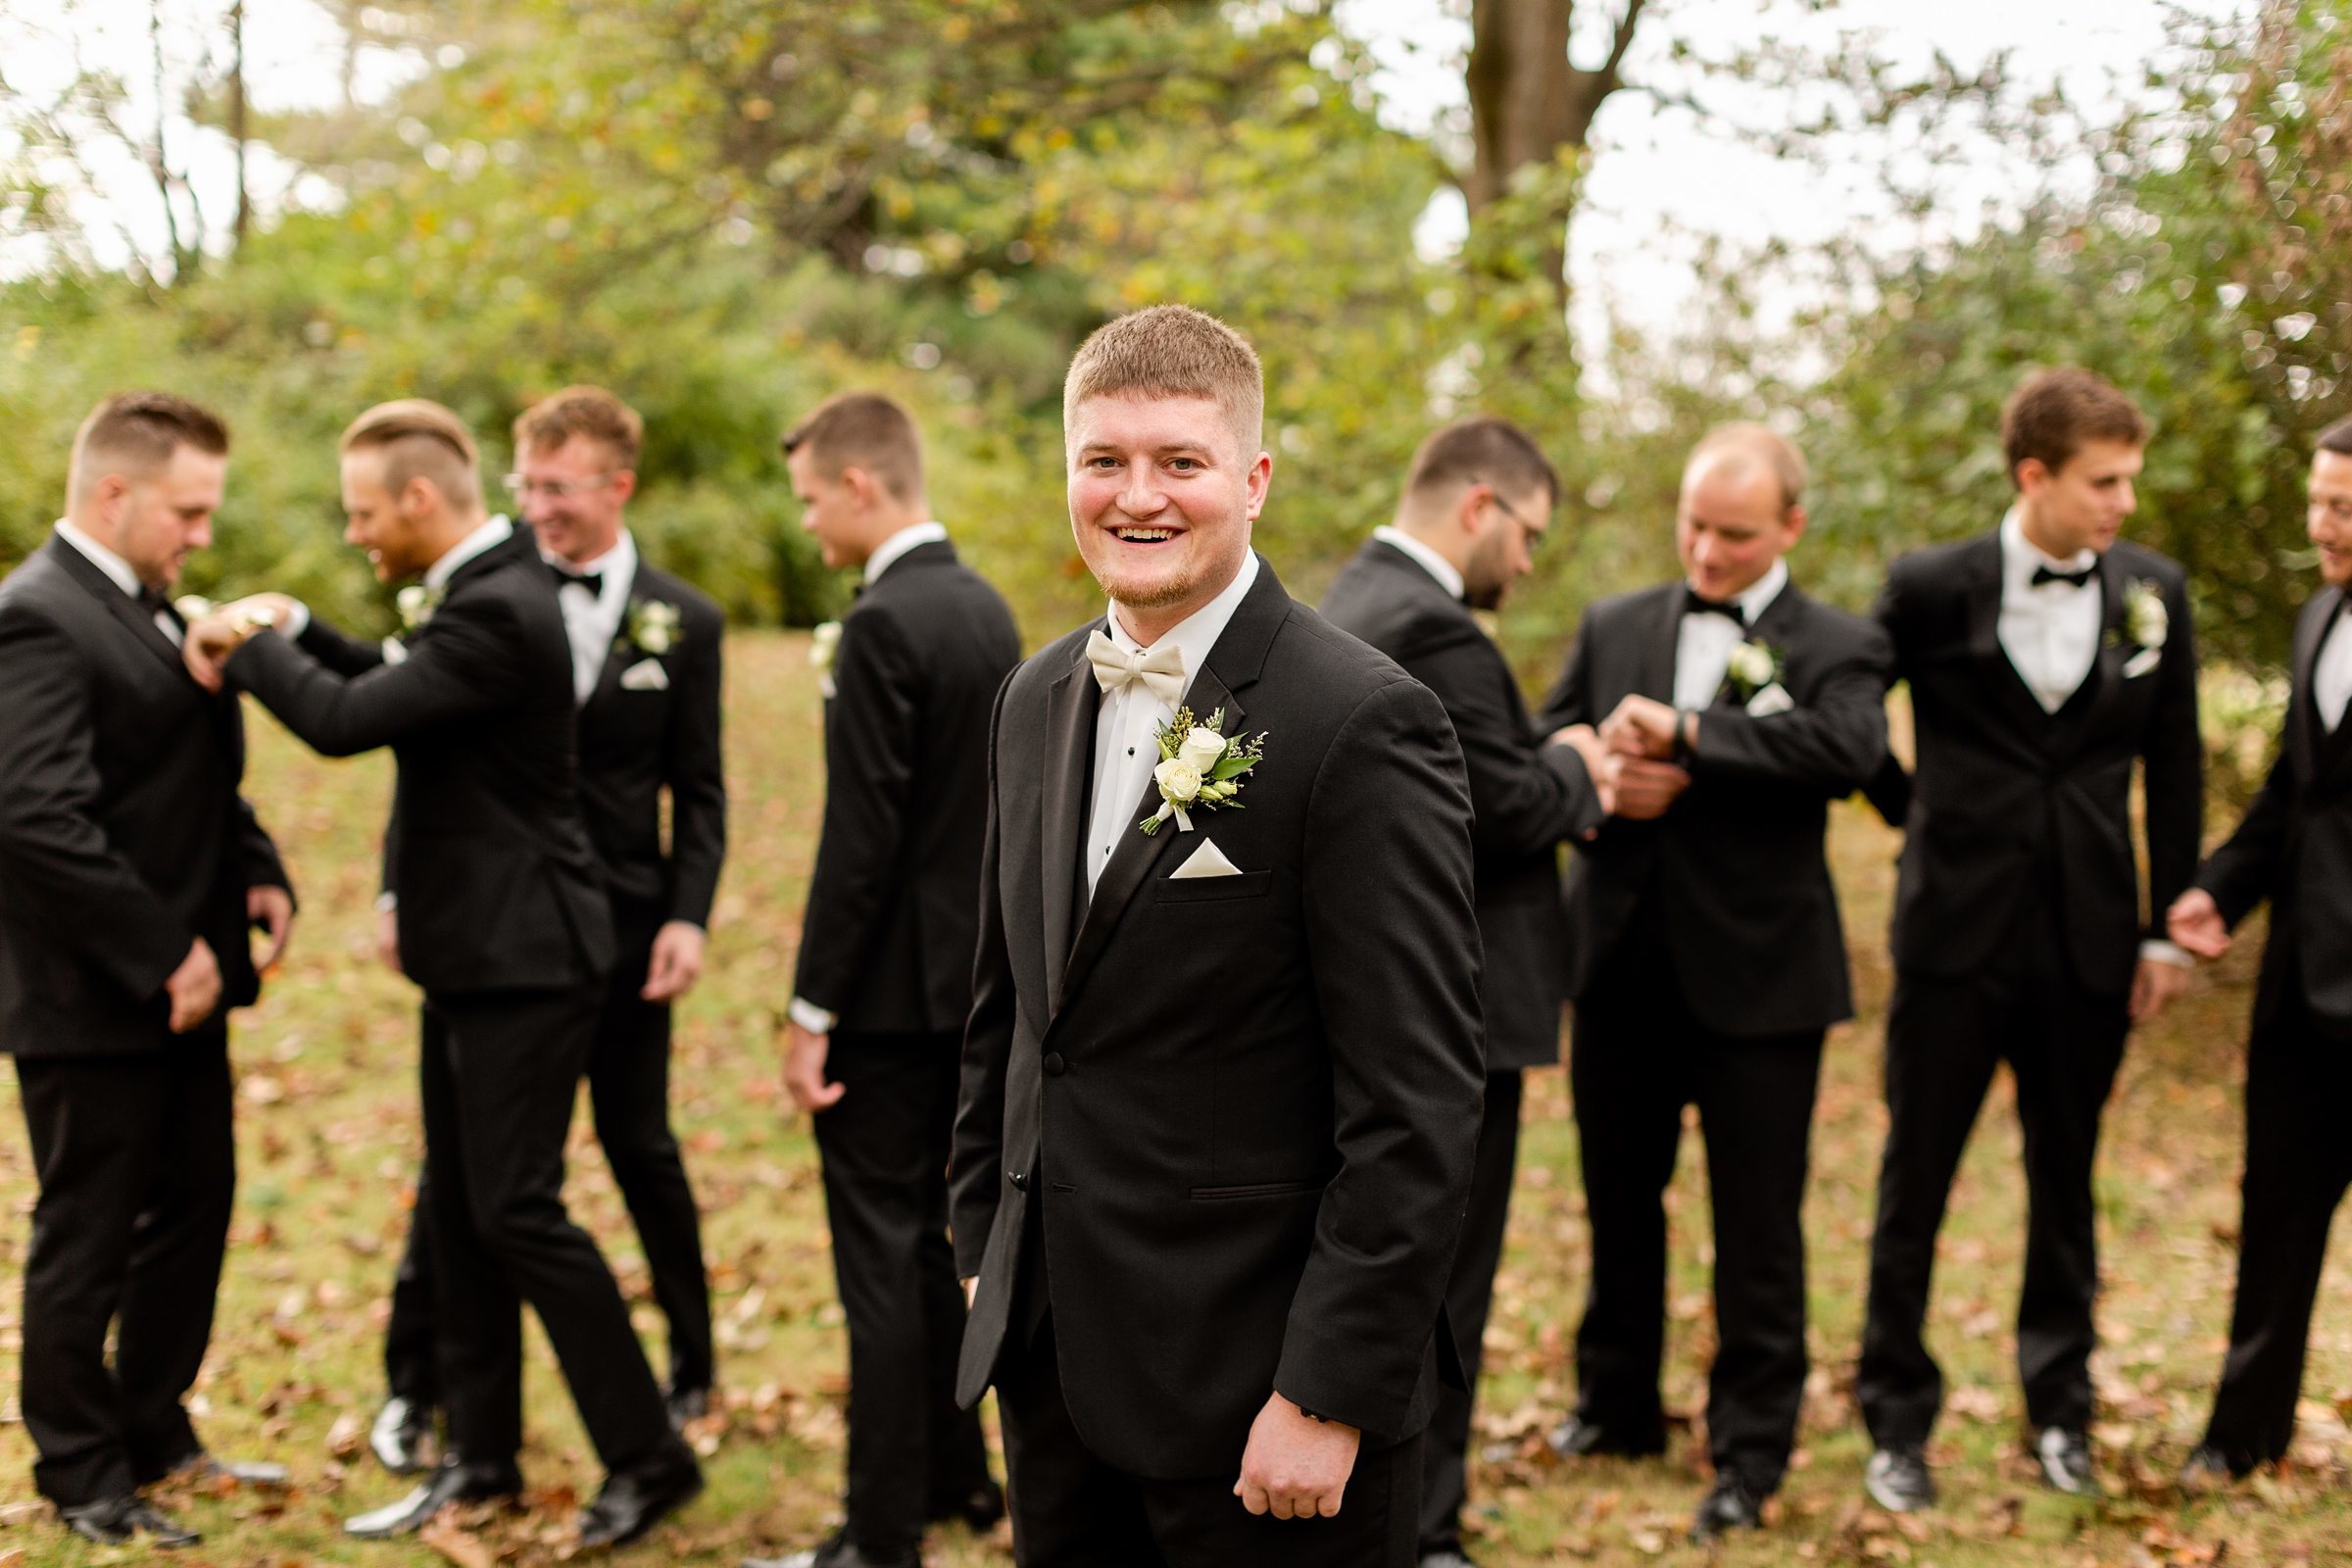 Hannah and Cody's Wedding in Booneville, IN054.jpg